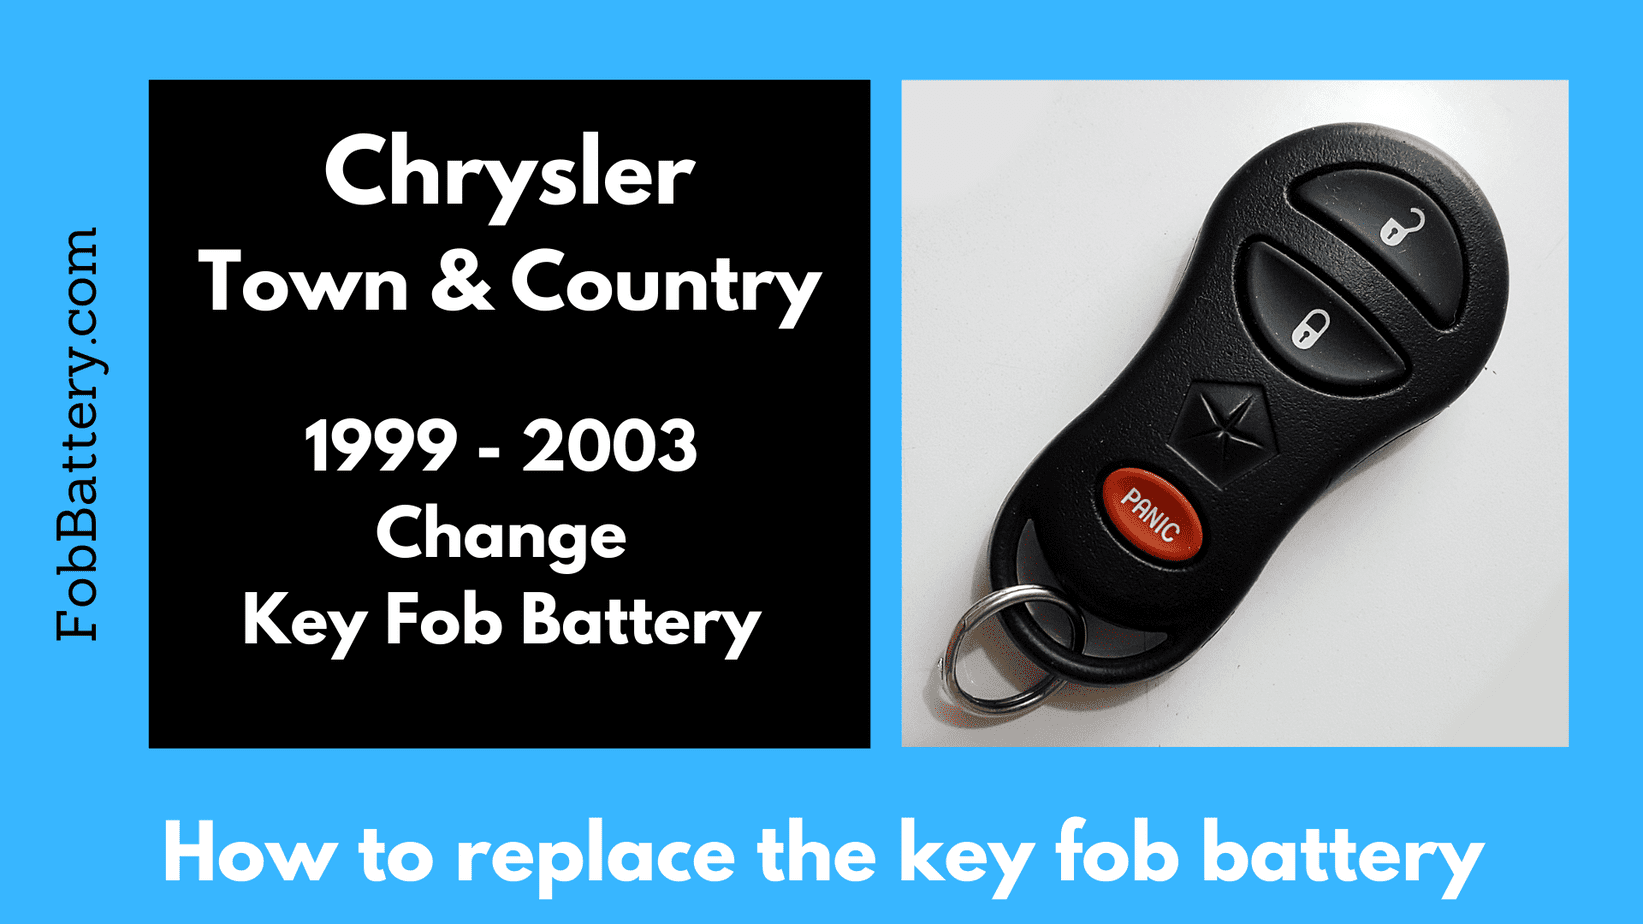 Chrysler Town and Country Key Fob Battery Replacement